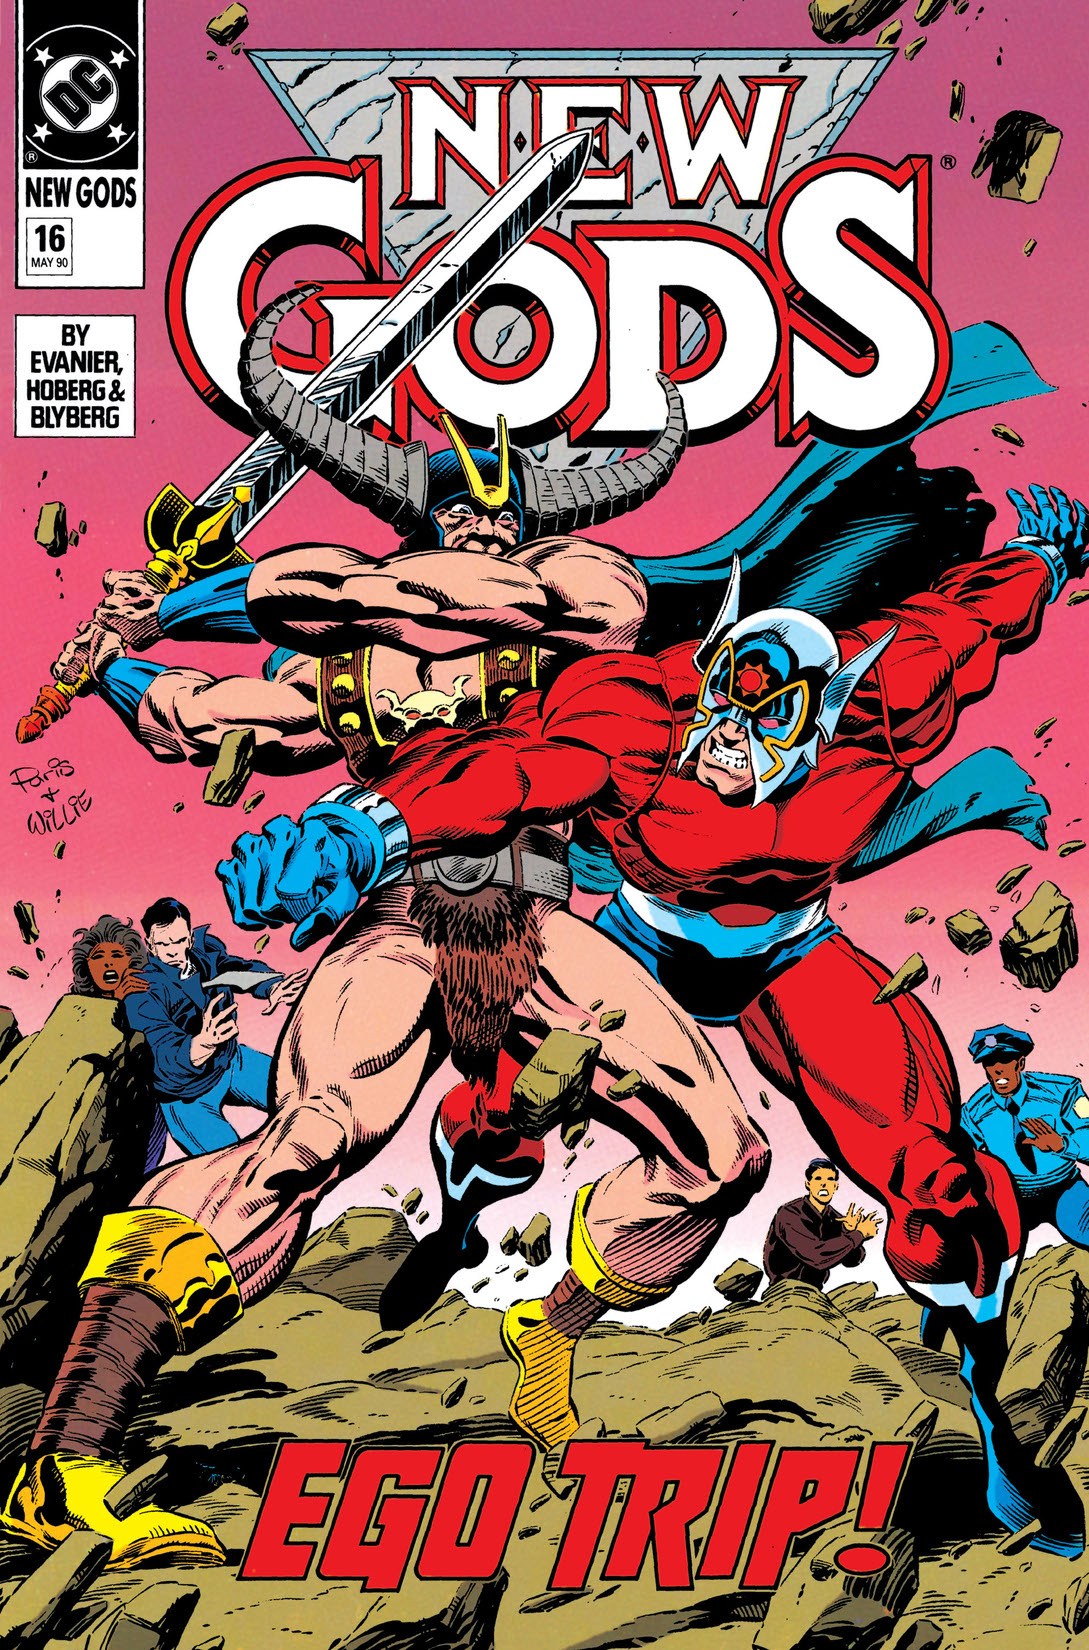 New Gods (1989-) #16 preview images